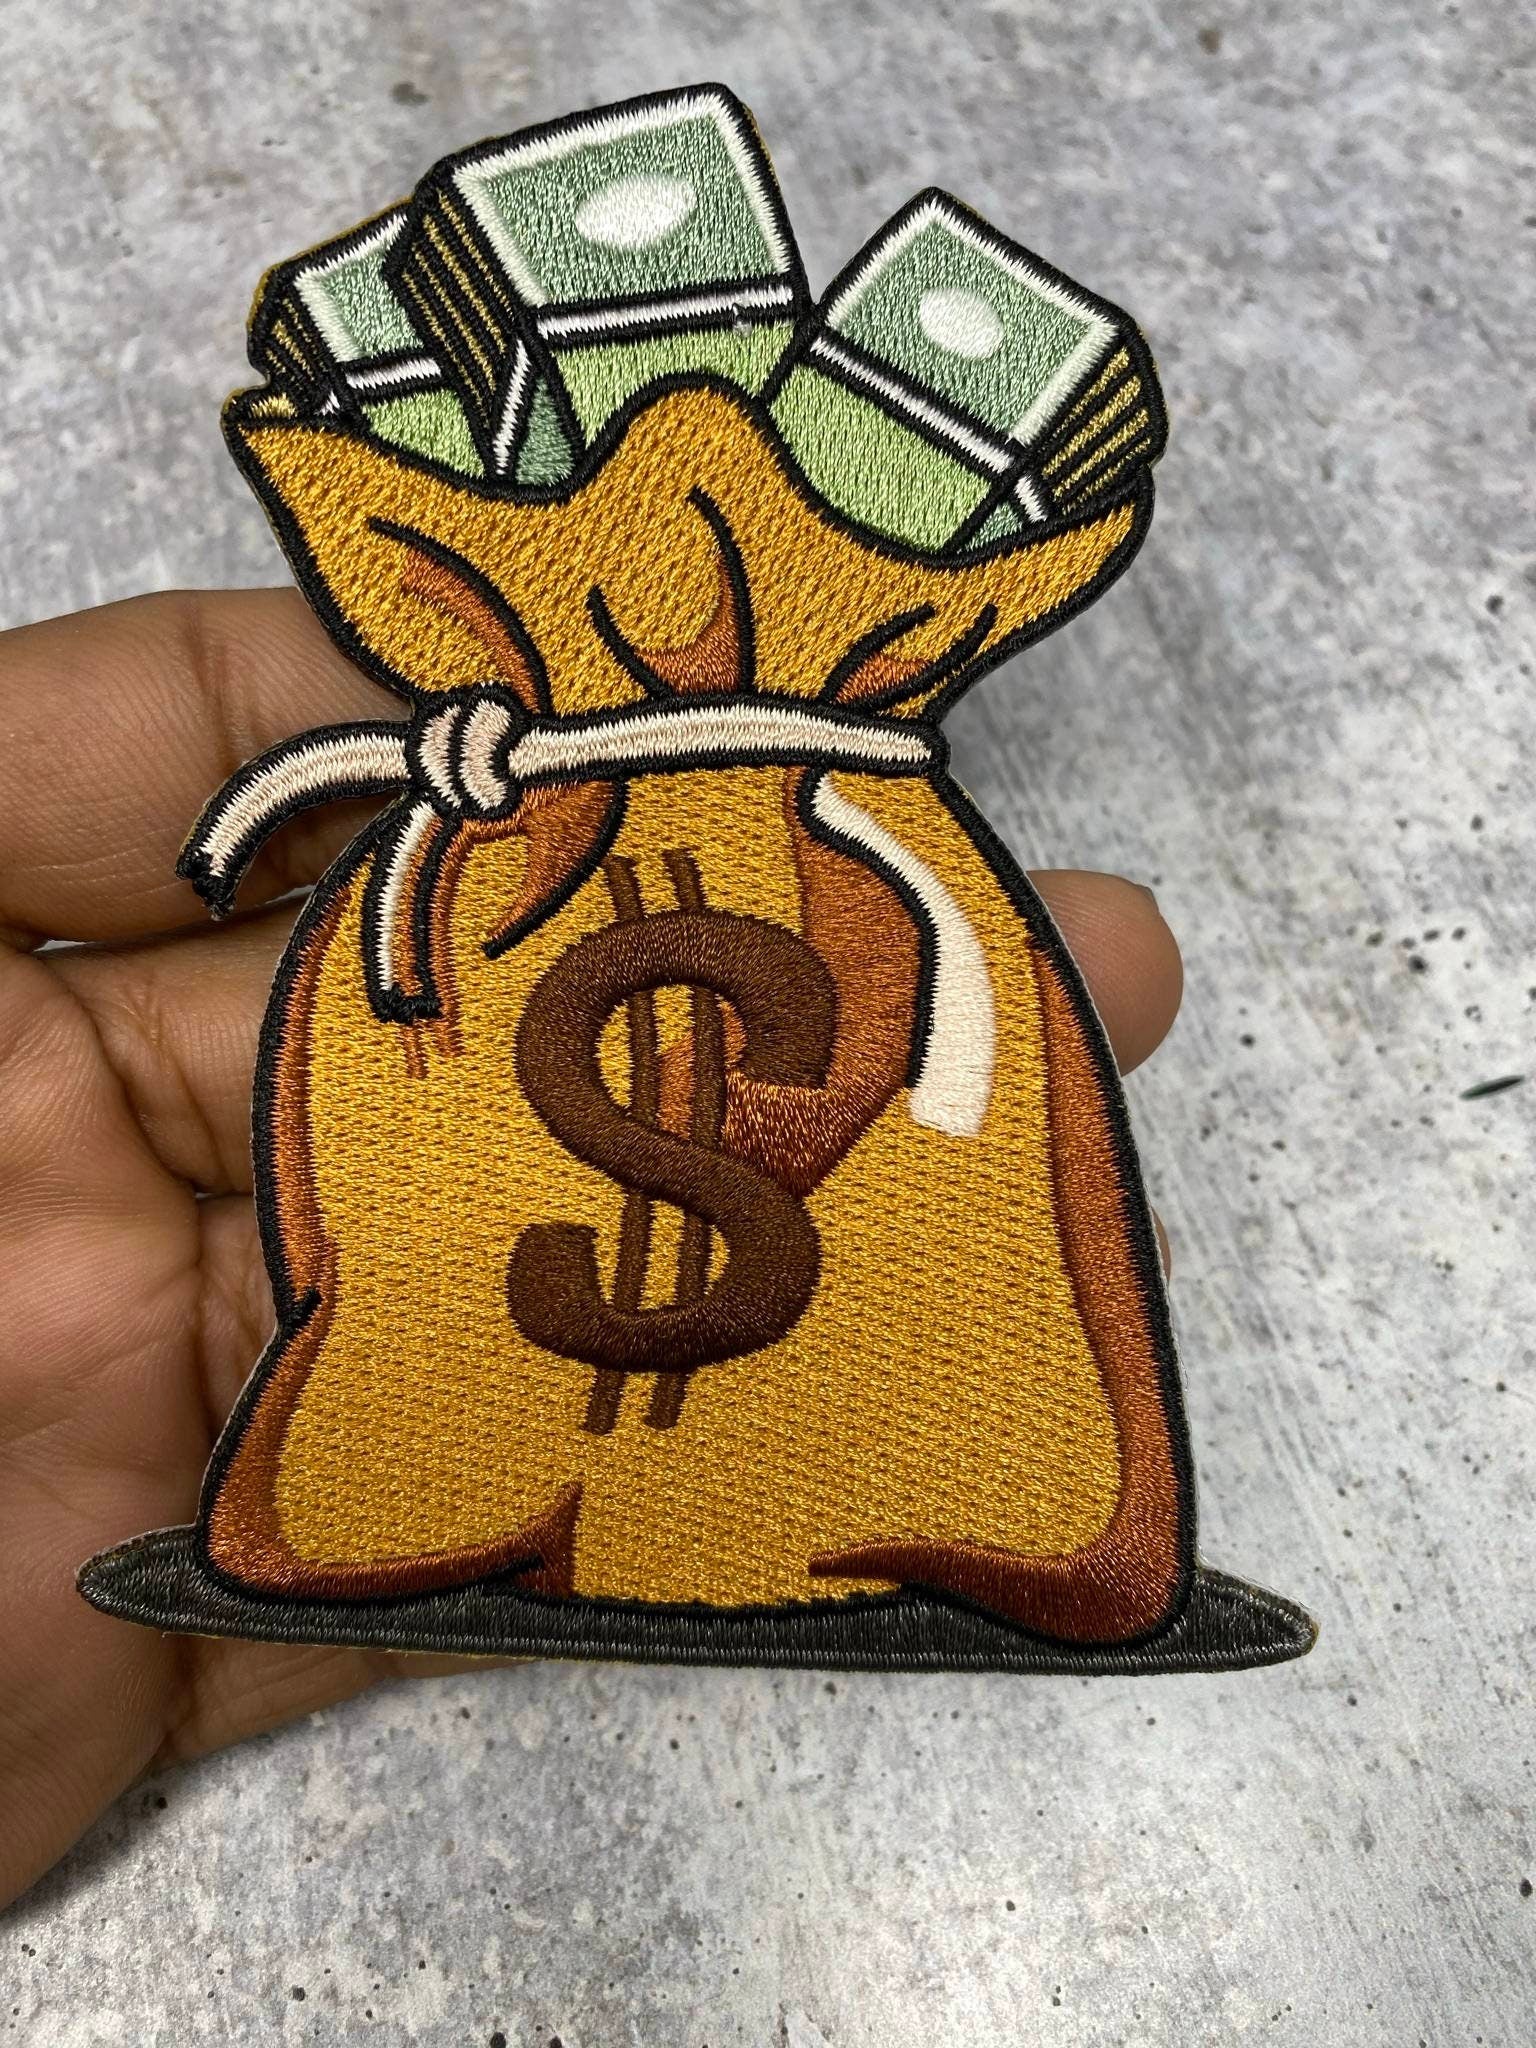 Medium: Bag of Money, NEW, Check a Bag Patch, Size 5, Iron-on